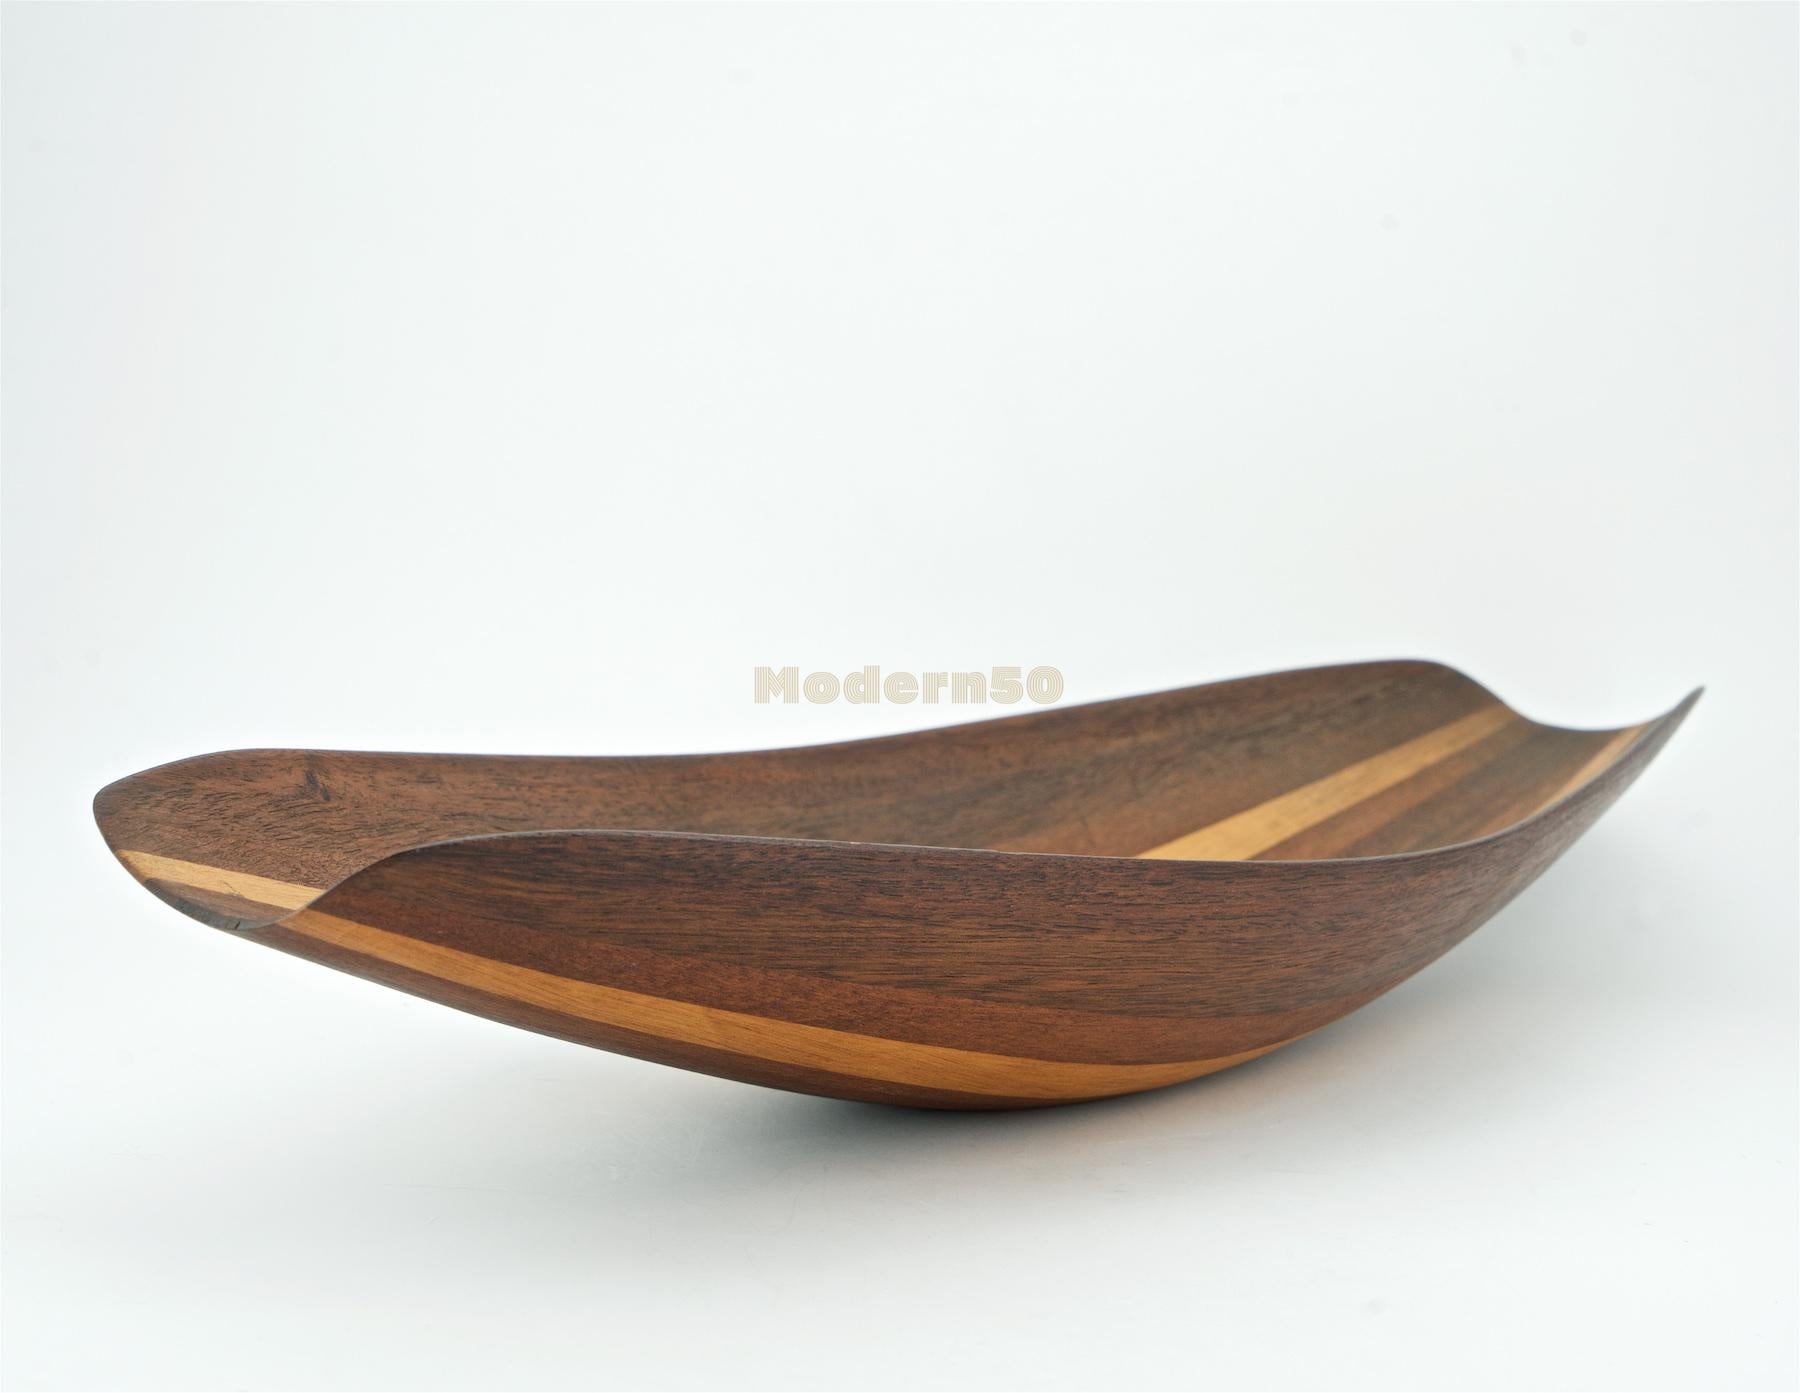 Oiled 1960s Canoe Bowl American Studio Craft Woodworkers Banana CabinModern Craftsman For Sale